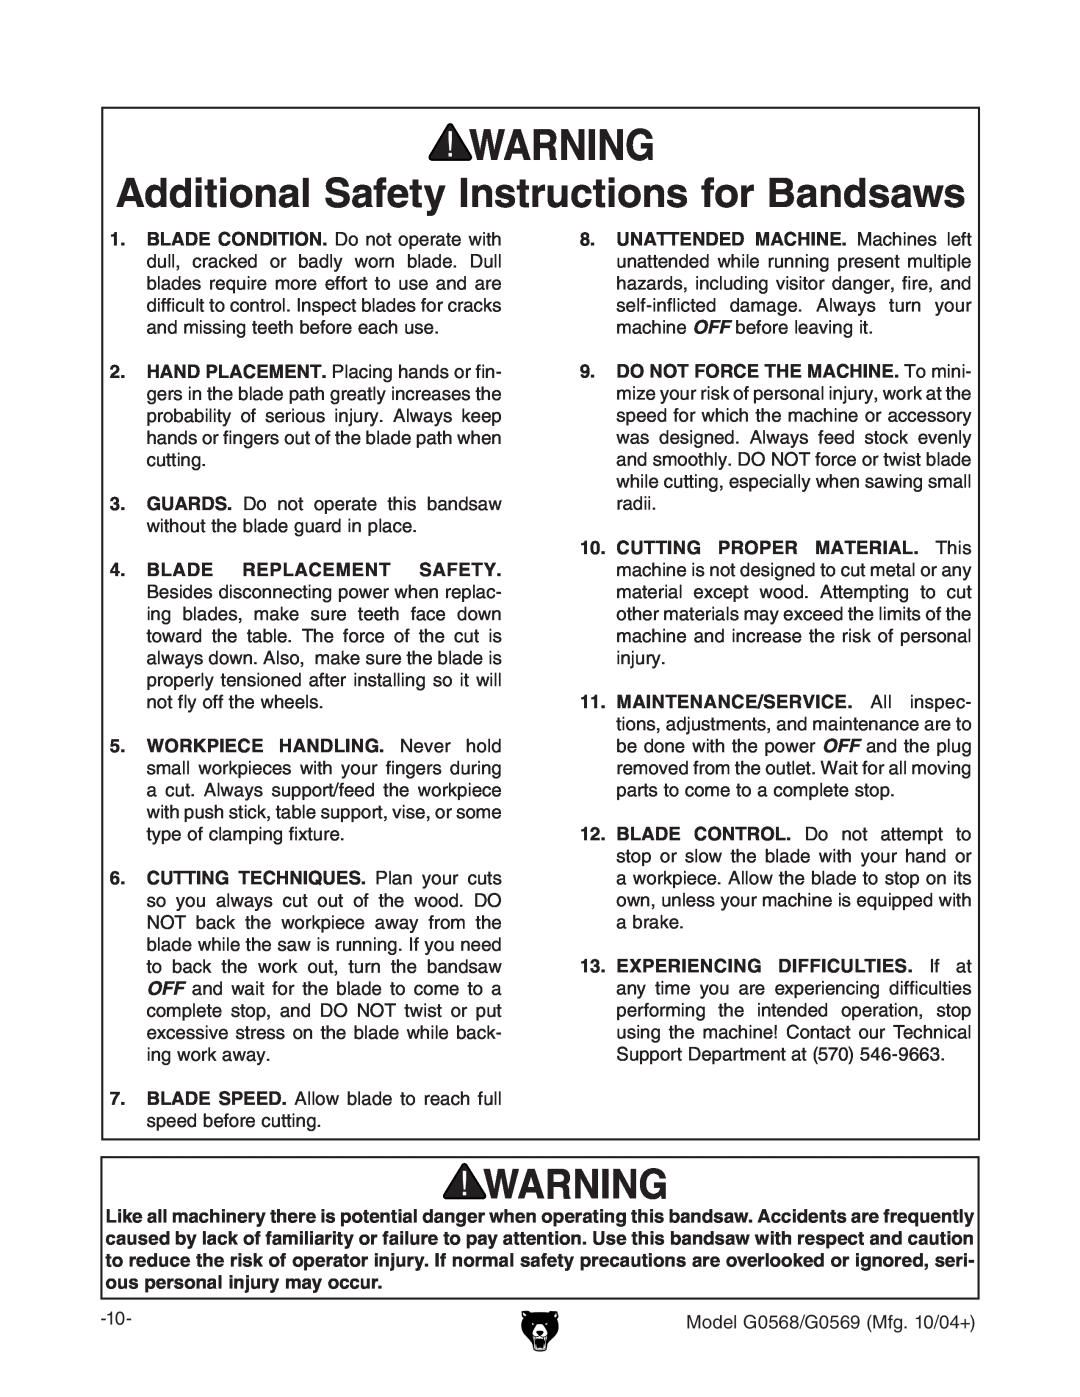 Grizzly G0569 Additional Safety Instructions for Bandsaws, BLADE SPEED. 6aadl WaVYZ id gZVX jaa heZZYWZdgZXjiic\# 